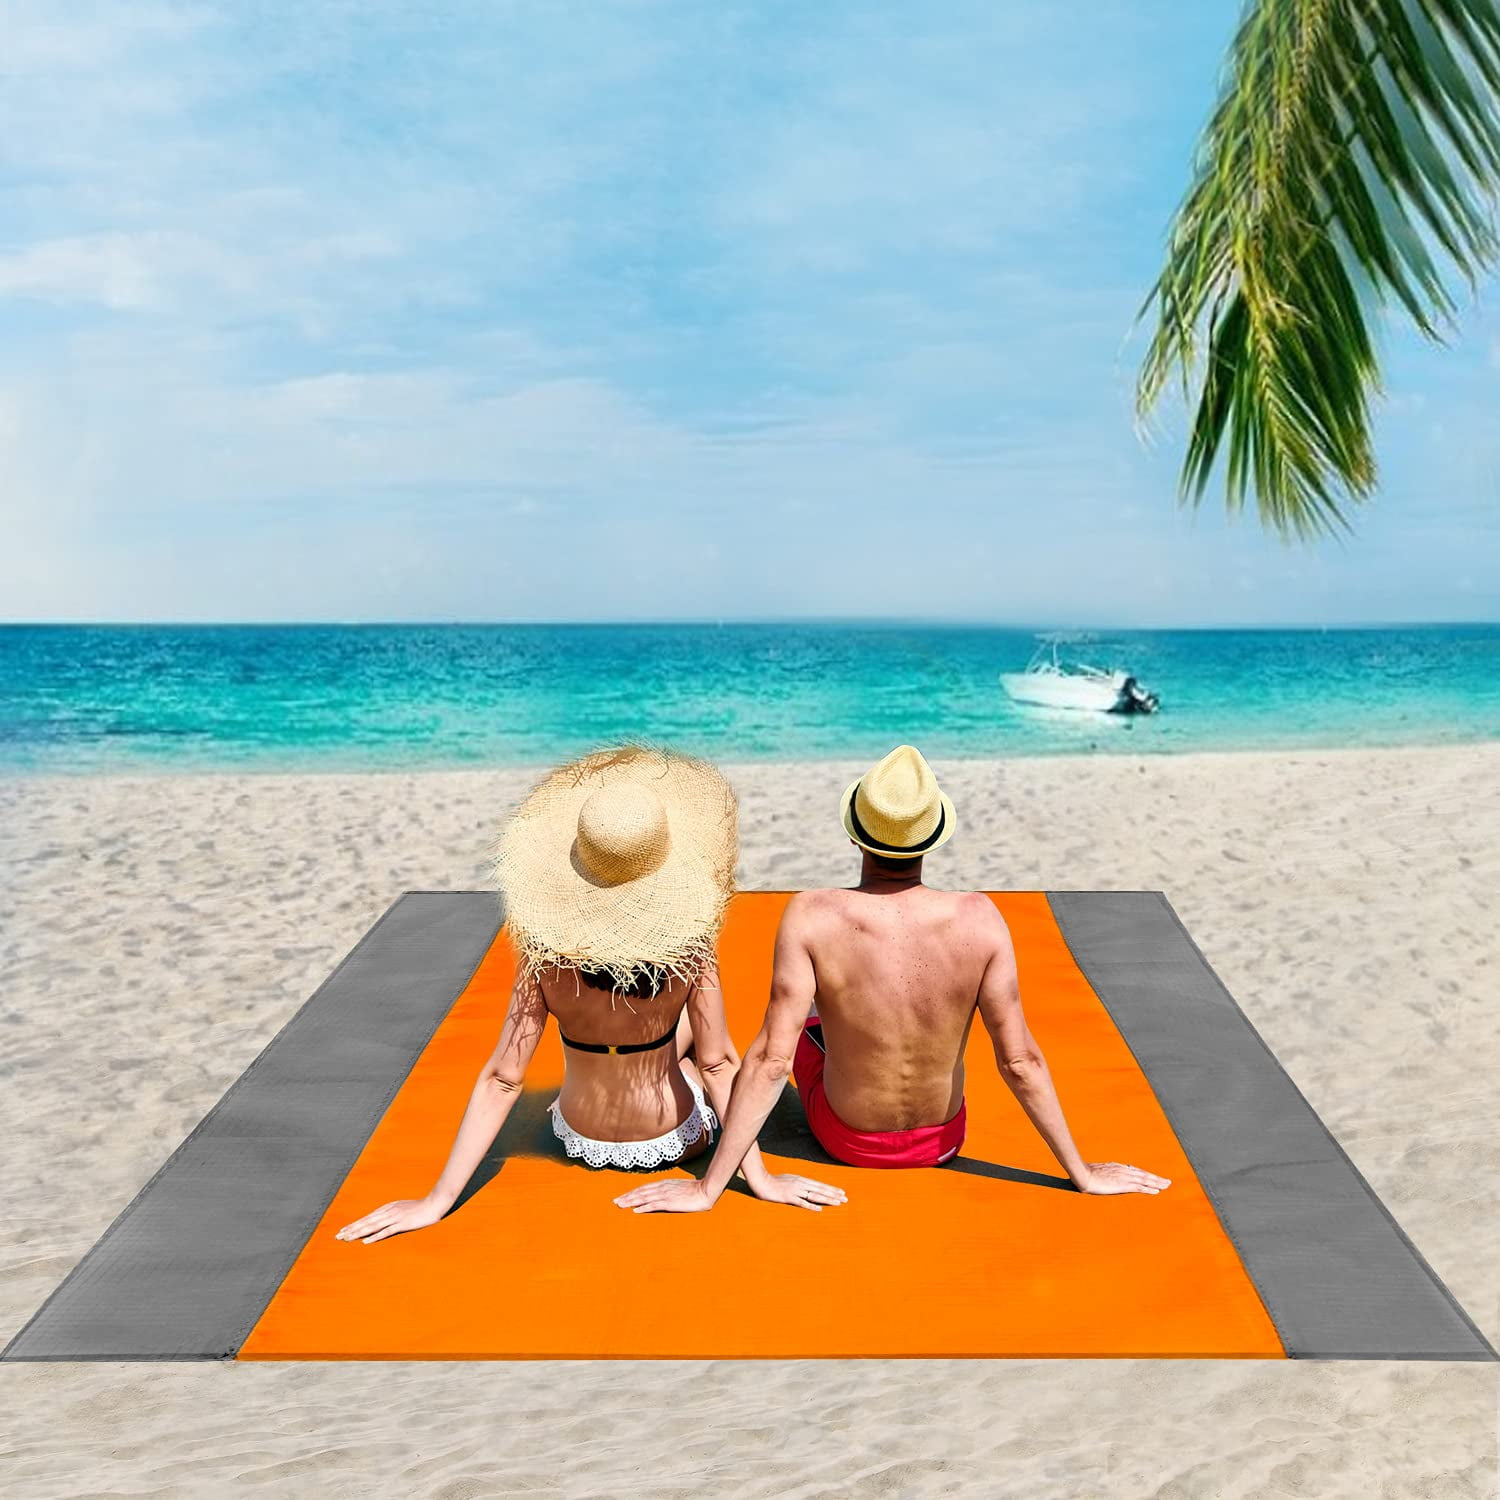 Blue Sand Proof Free Beach Picnic Blanket Oversized Waterproof Mat for Camping 